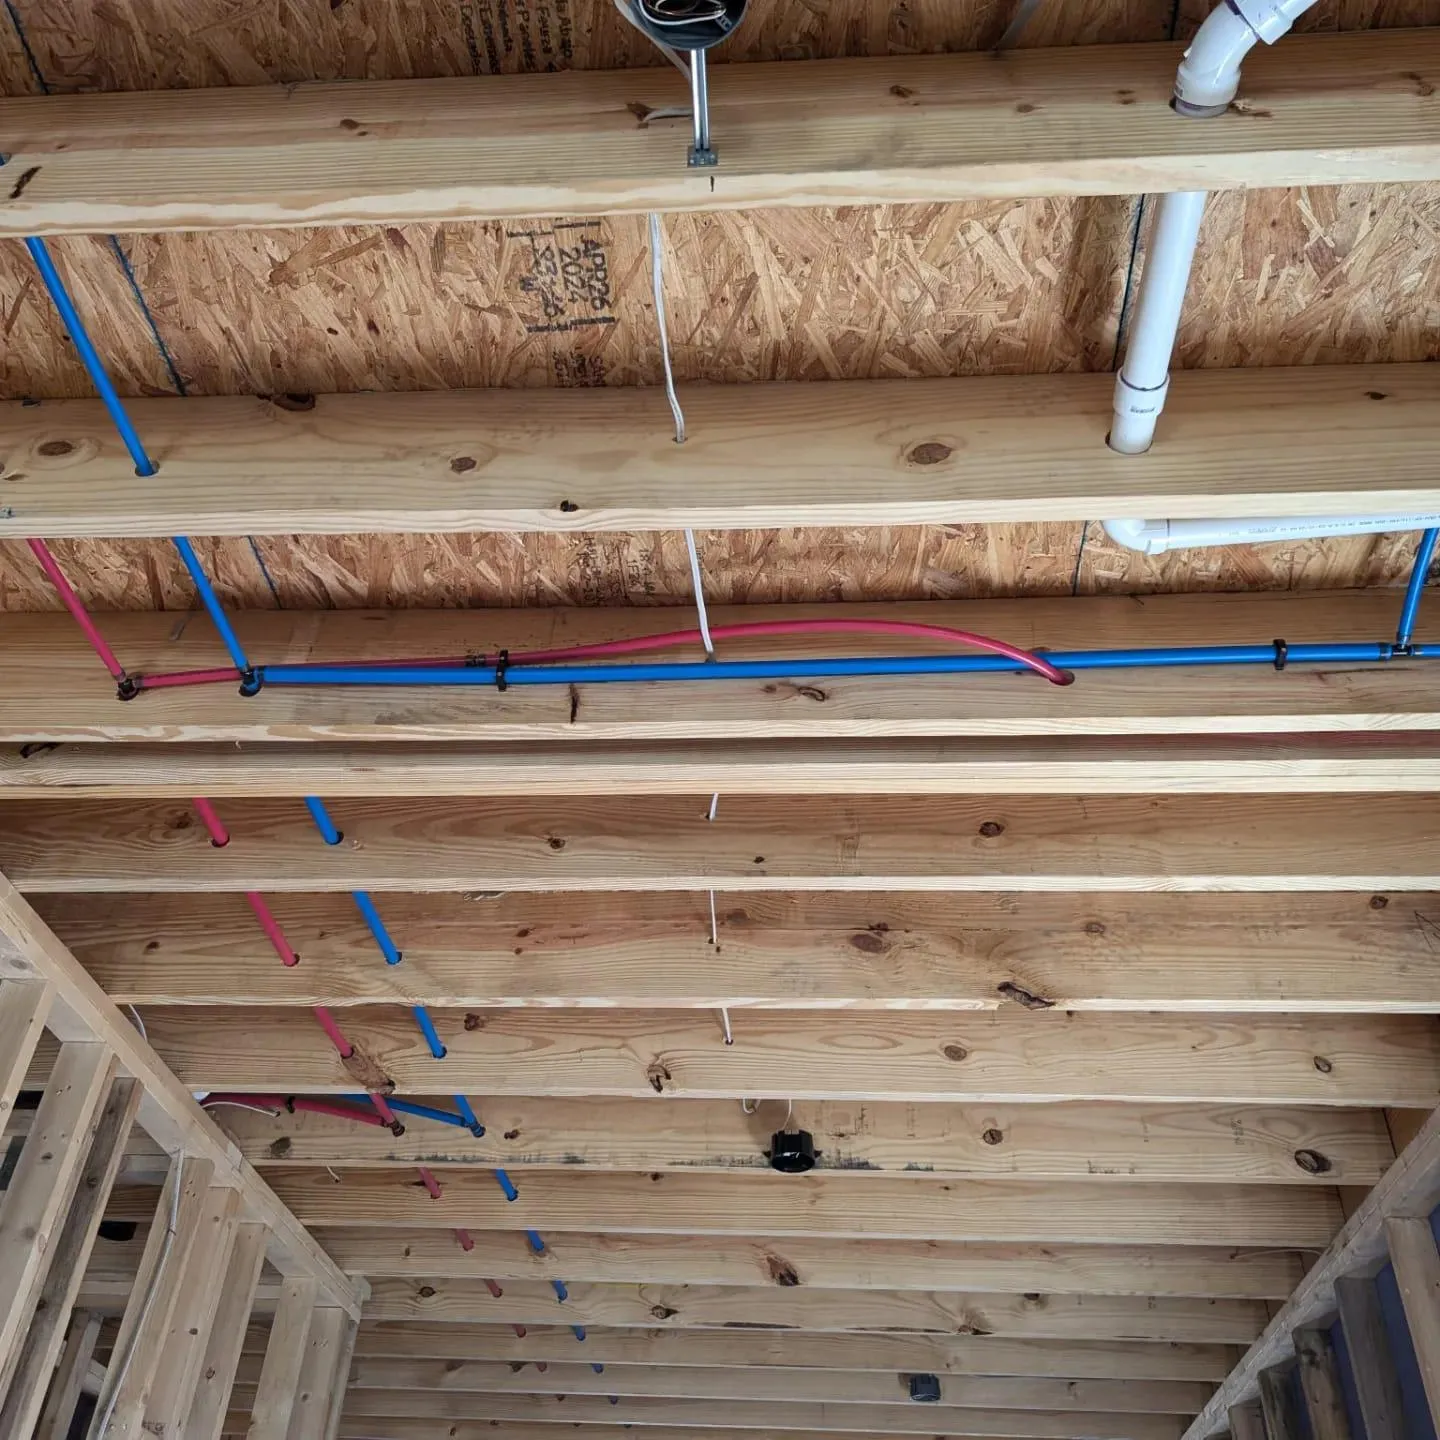 Plumbing Additions for Dragon Plumbing & Contracting in Chesterfield, VA